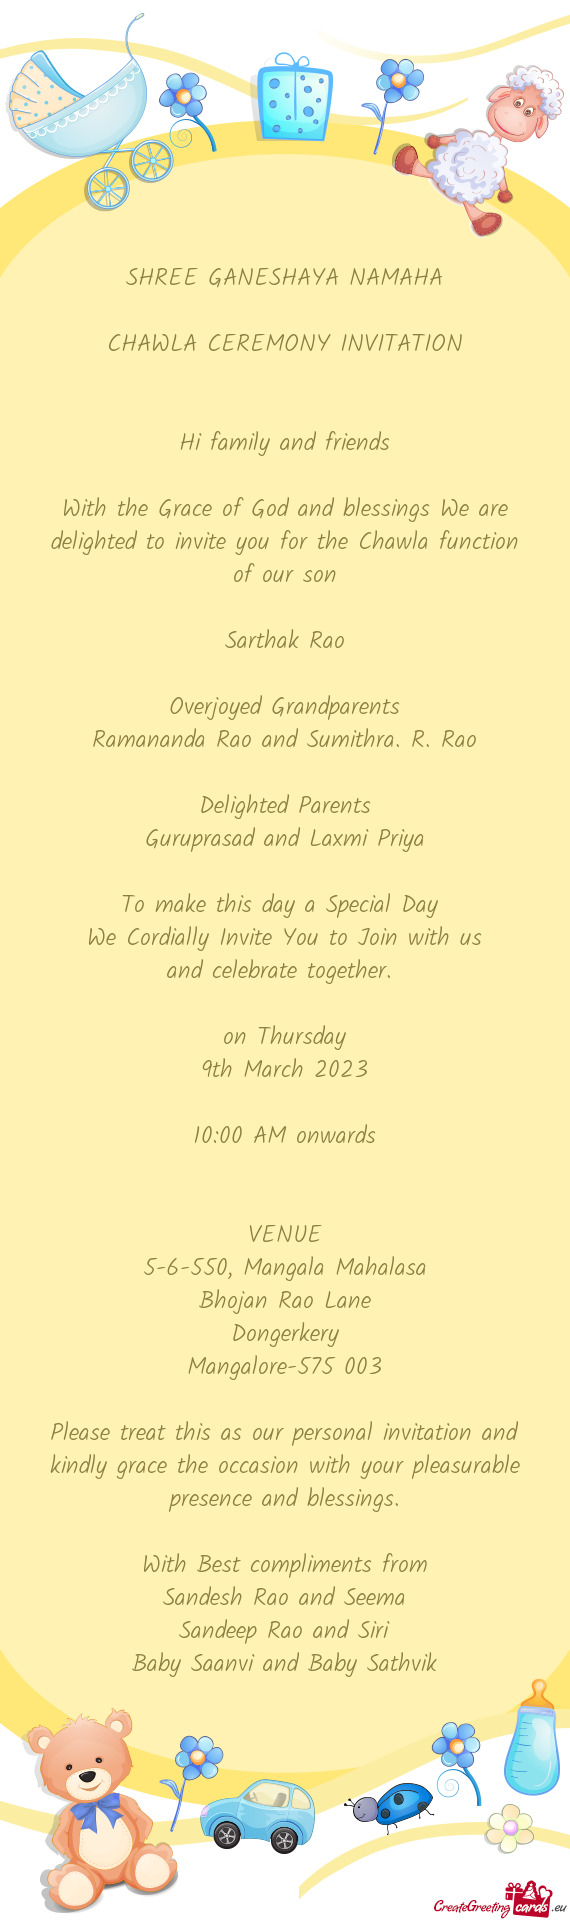 With the Grace of God and blessings We are delighted to invite you for the Chawla function of our so